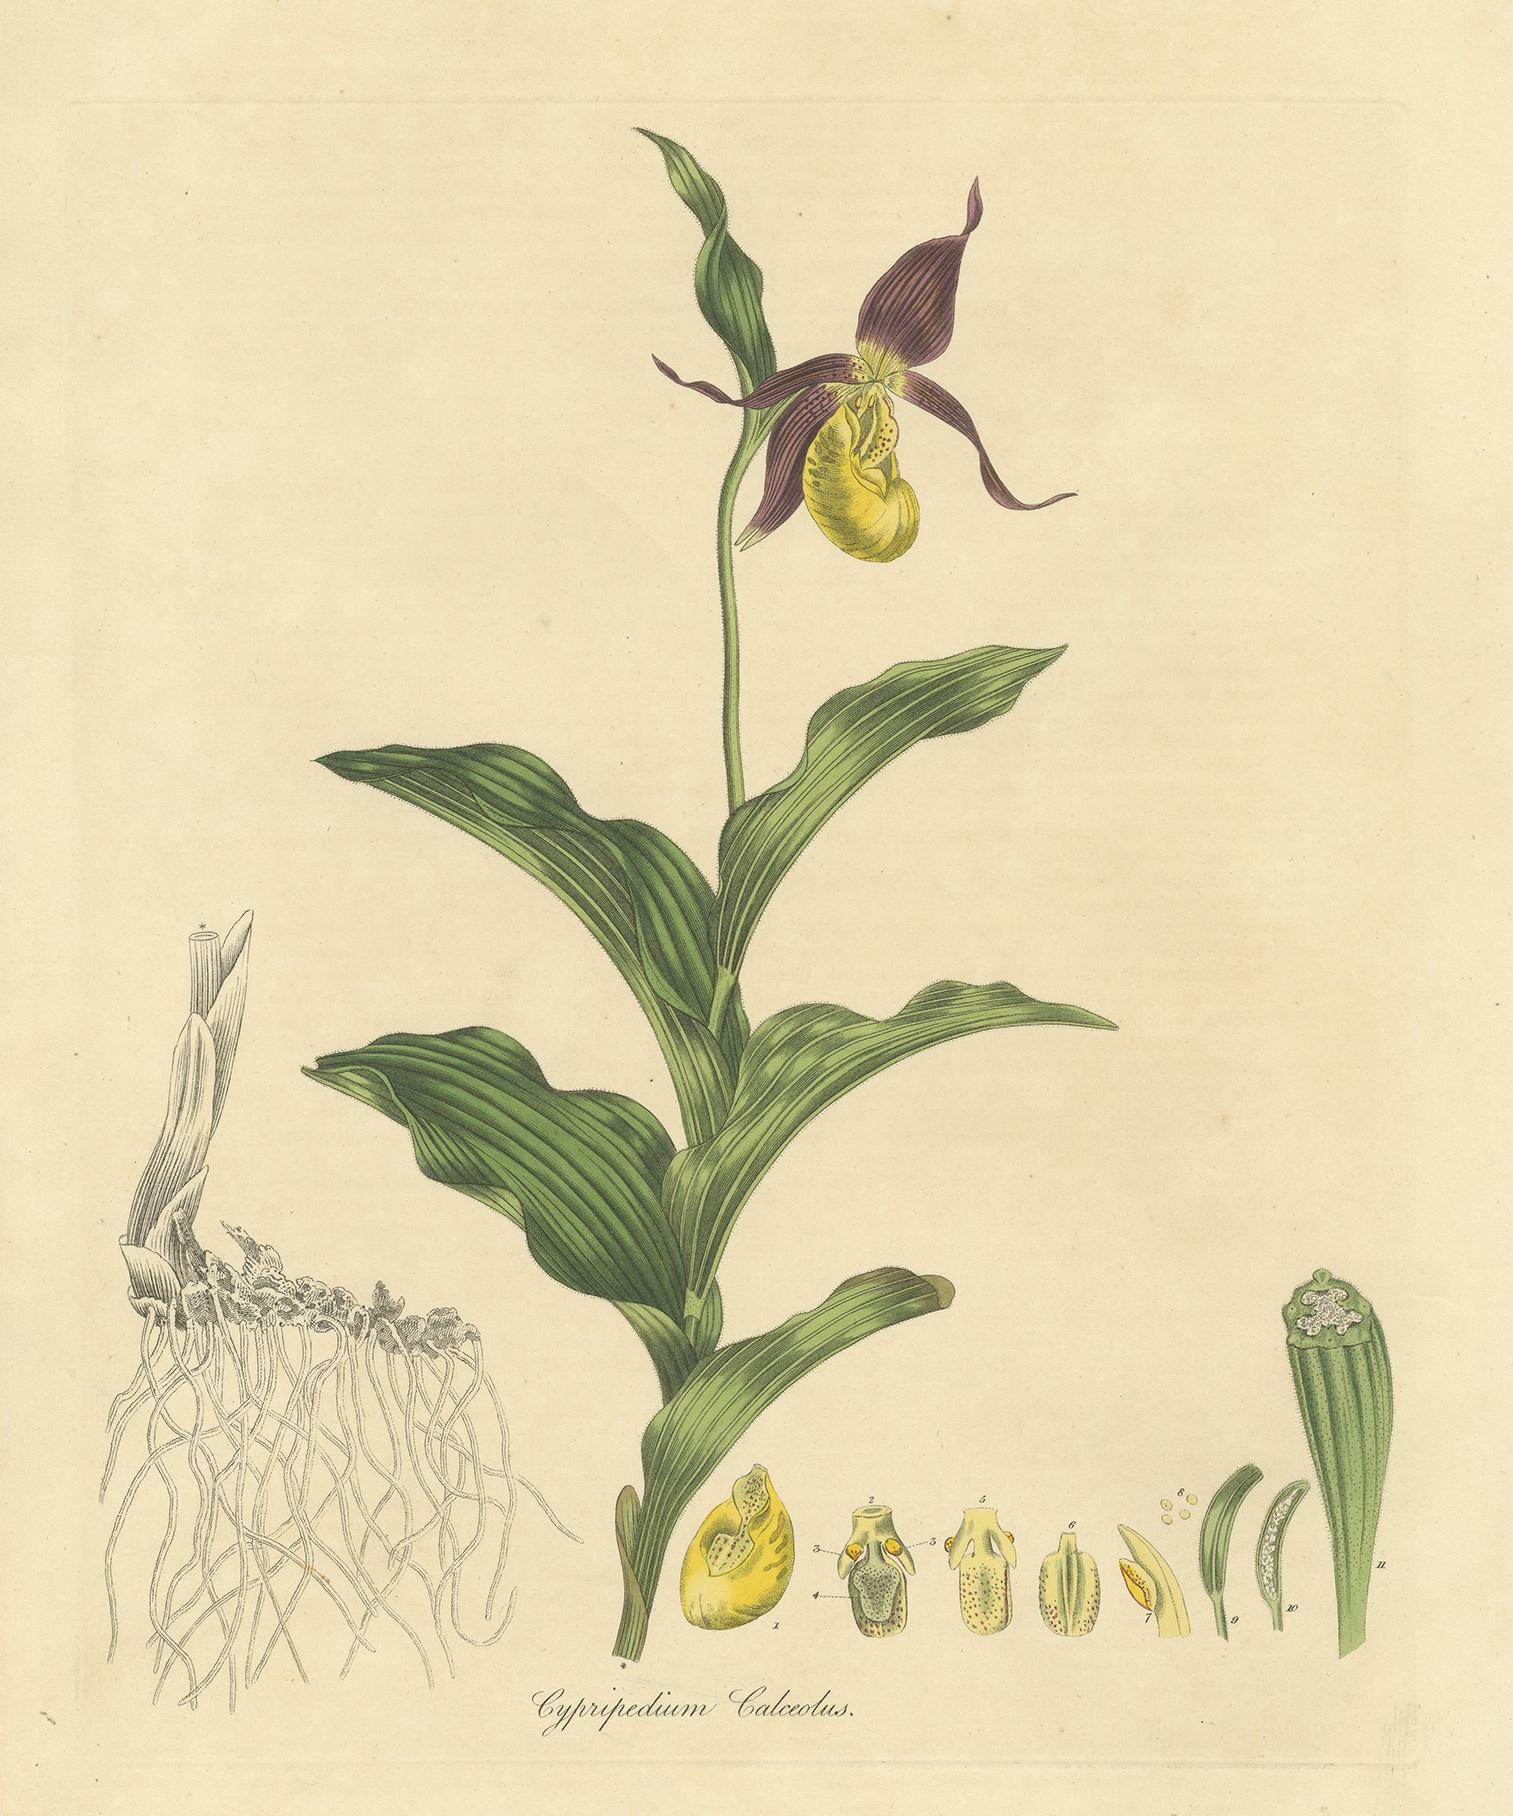 Antique botany print titled 'Cypripedium Calceolus'. Hand colored engraving of cypripedium calceolus, a ladies-slipper orchid, and the type species of the genus Cypripedium. It is native to Europe and Asia. This print originates from 'Flora